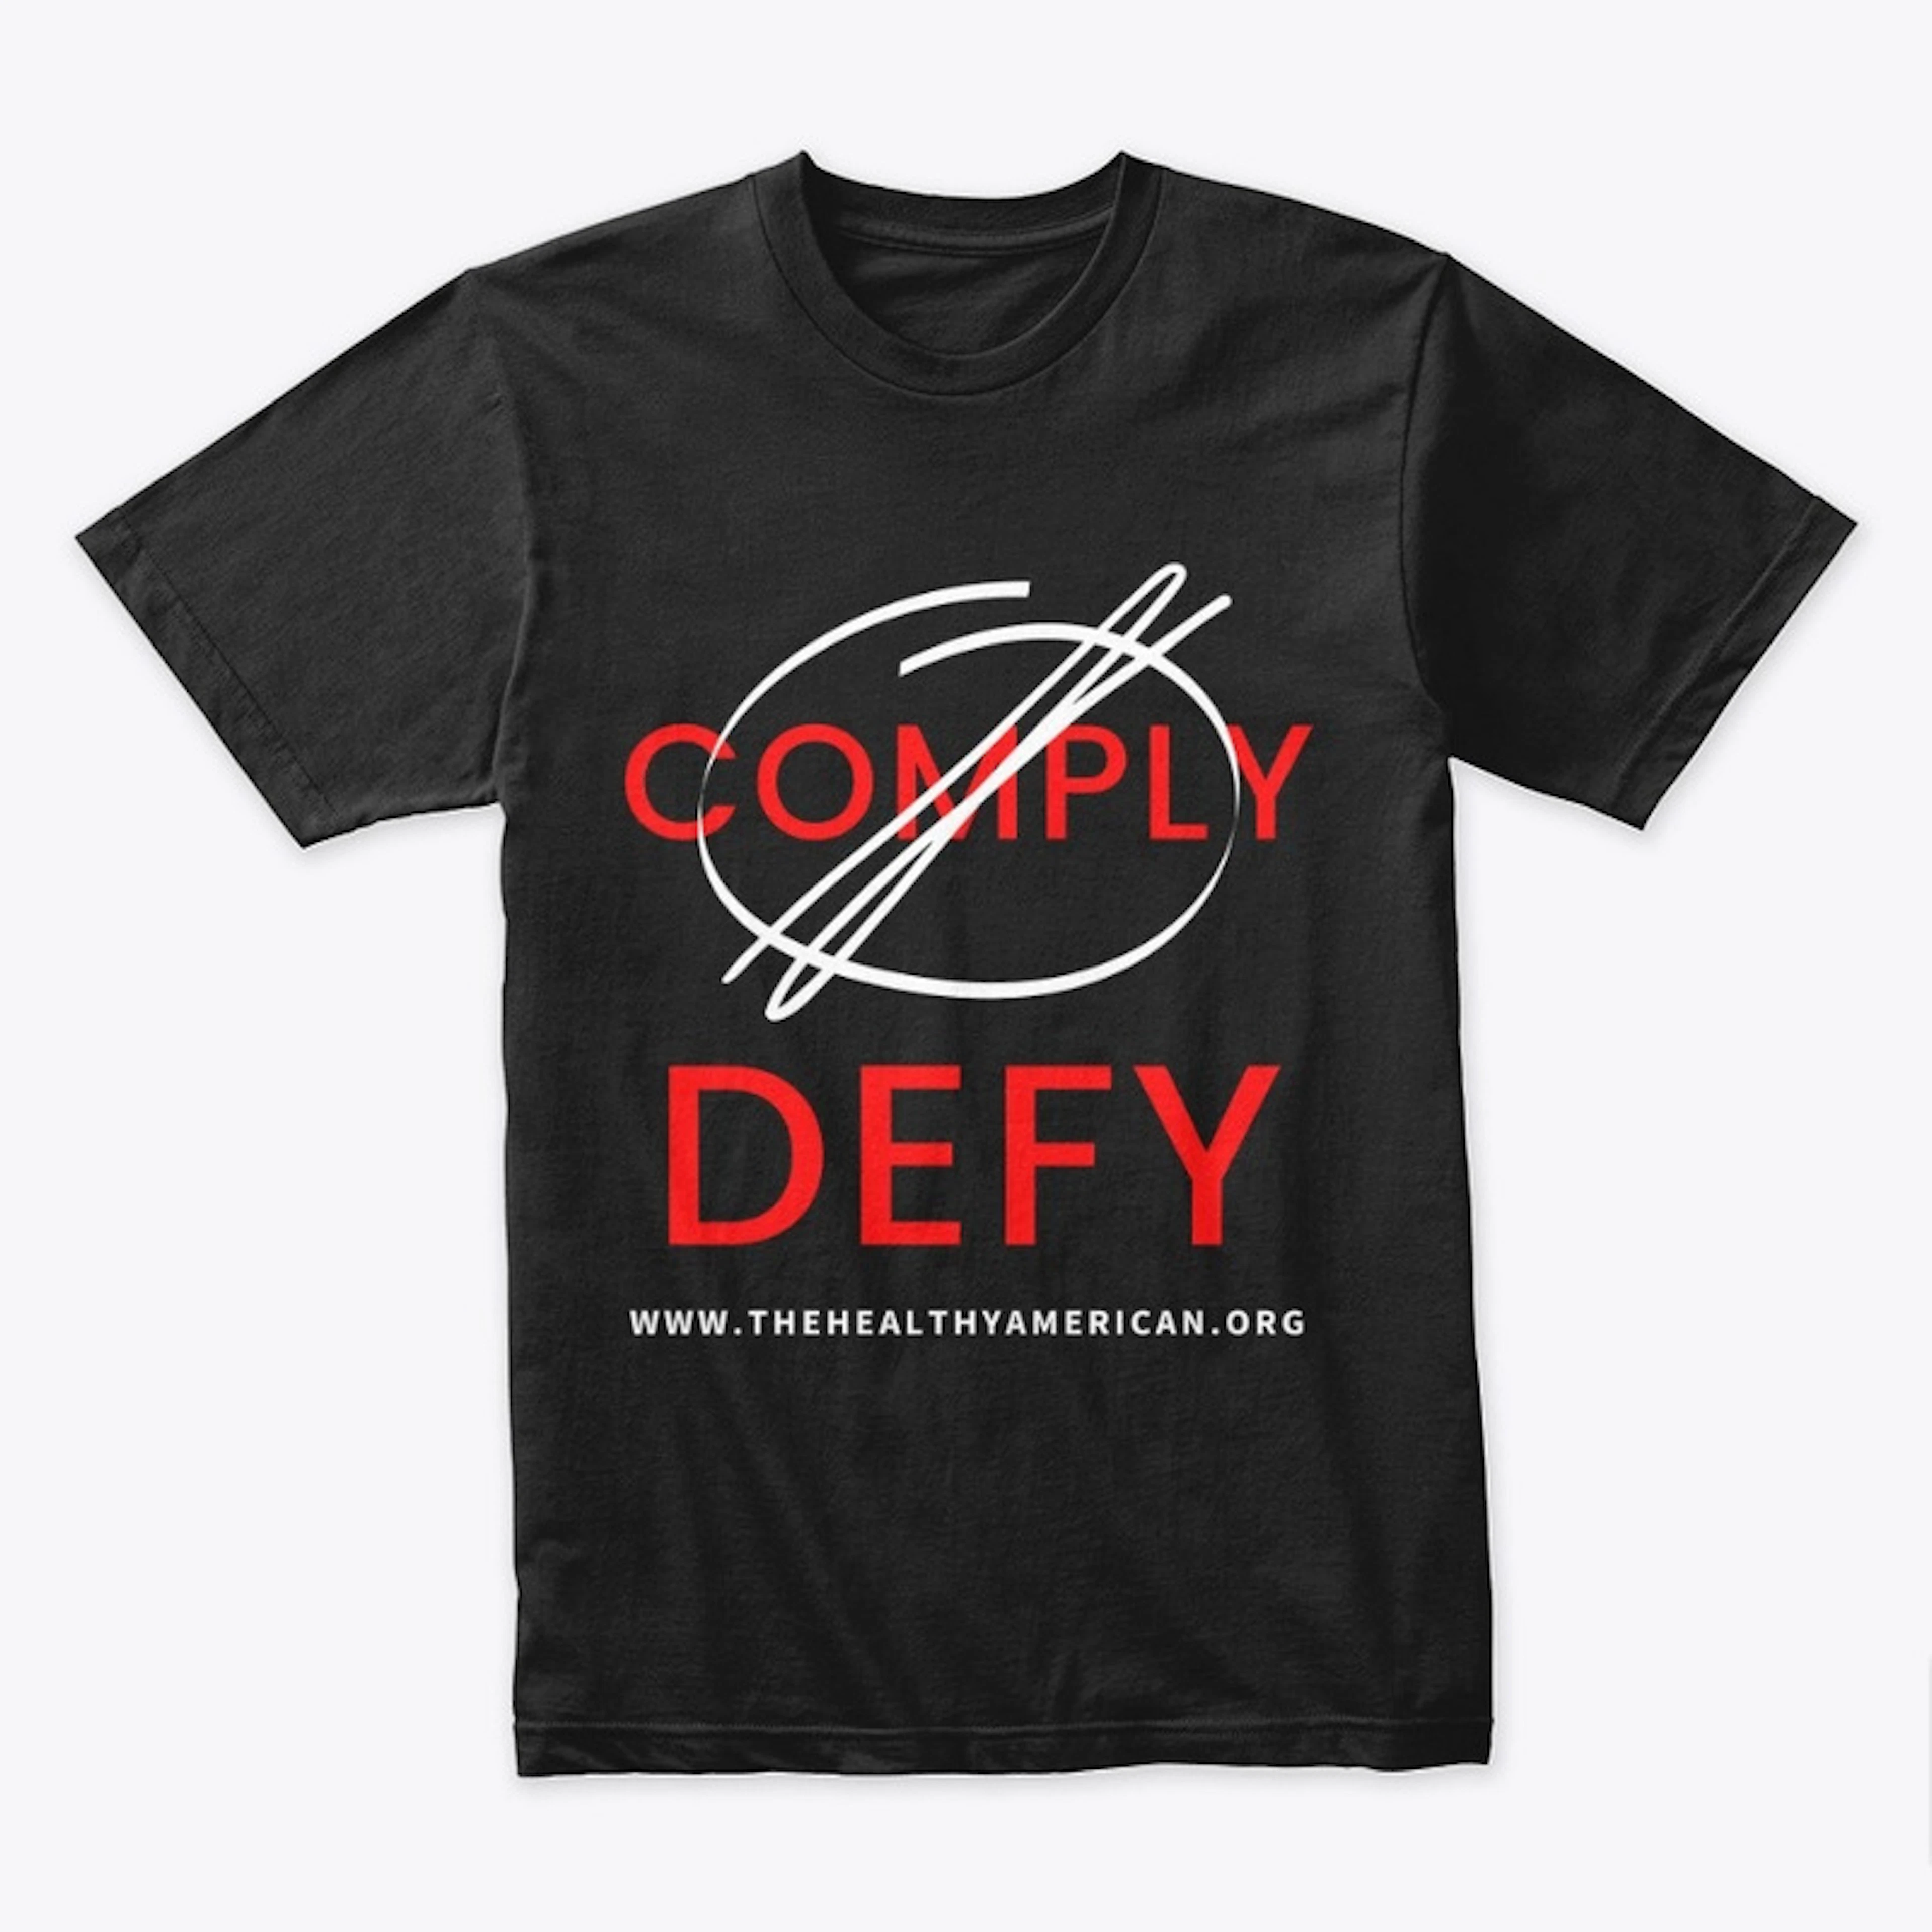 Don't Comply -- DEFY!